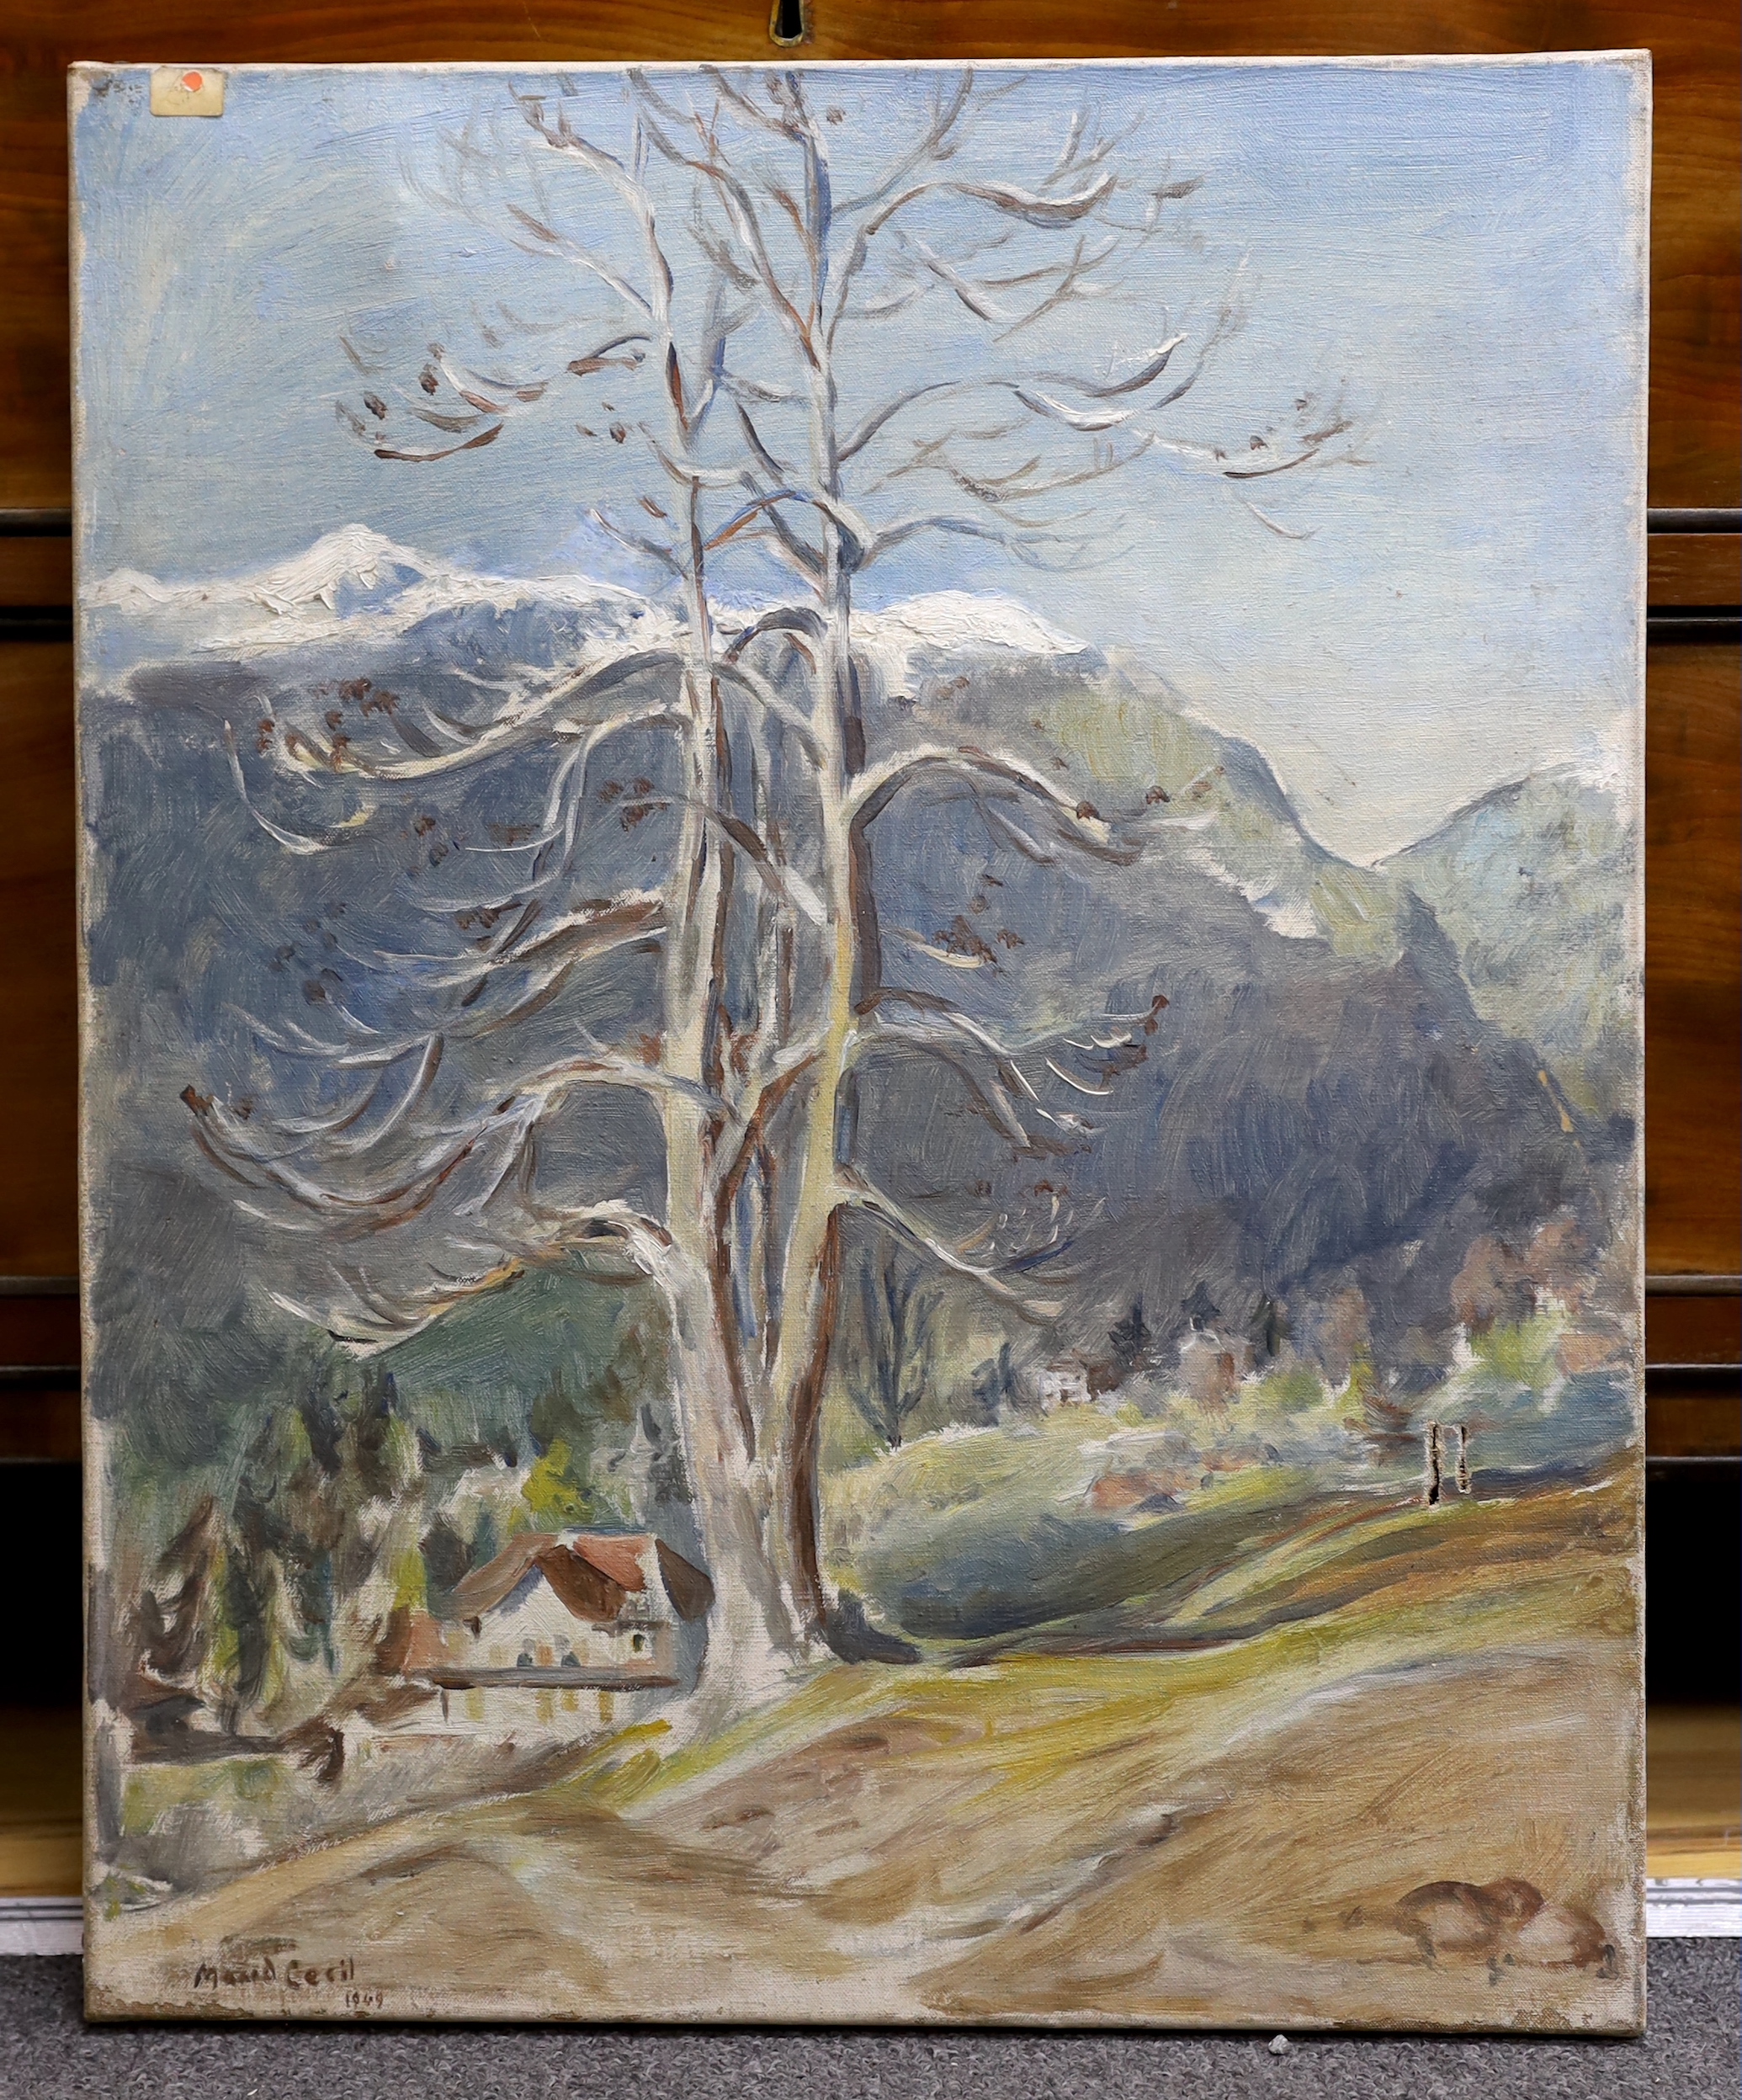 Hon. Maud Cecil (1904-1981), oil on canvas, Swiss mountainous landscape with chalets, signed and dated 1949, 50 x 40cm, unframed